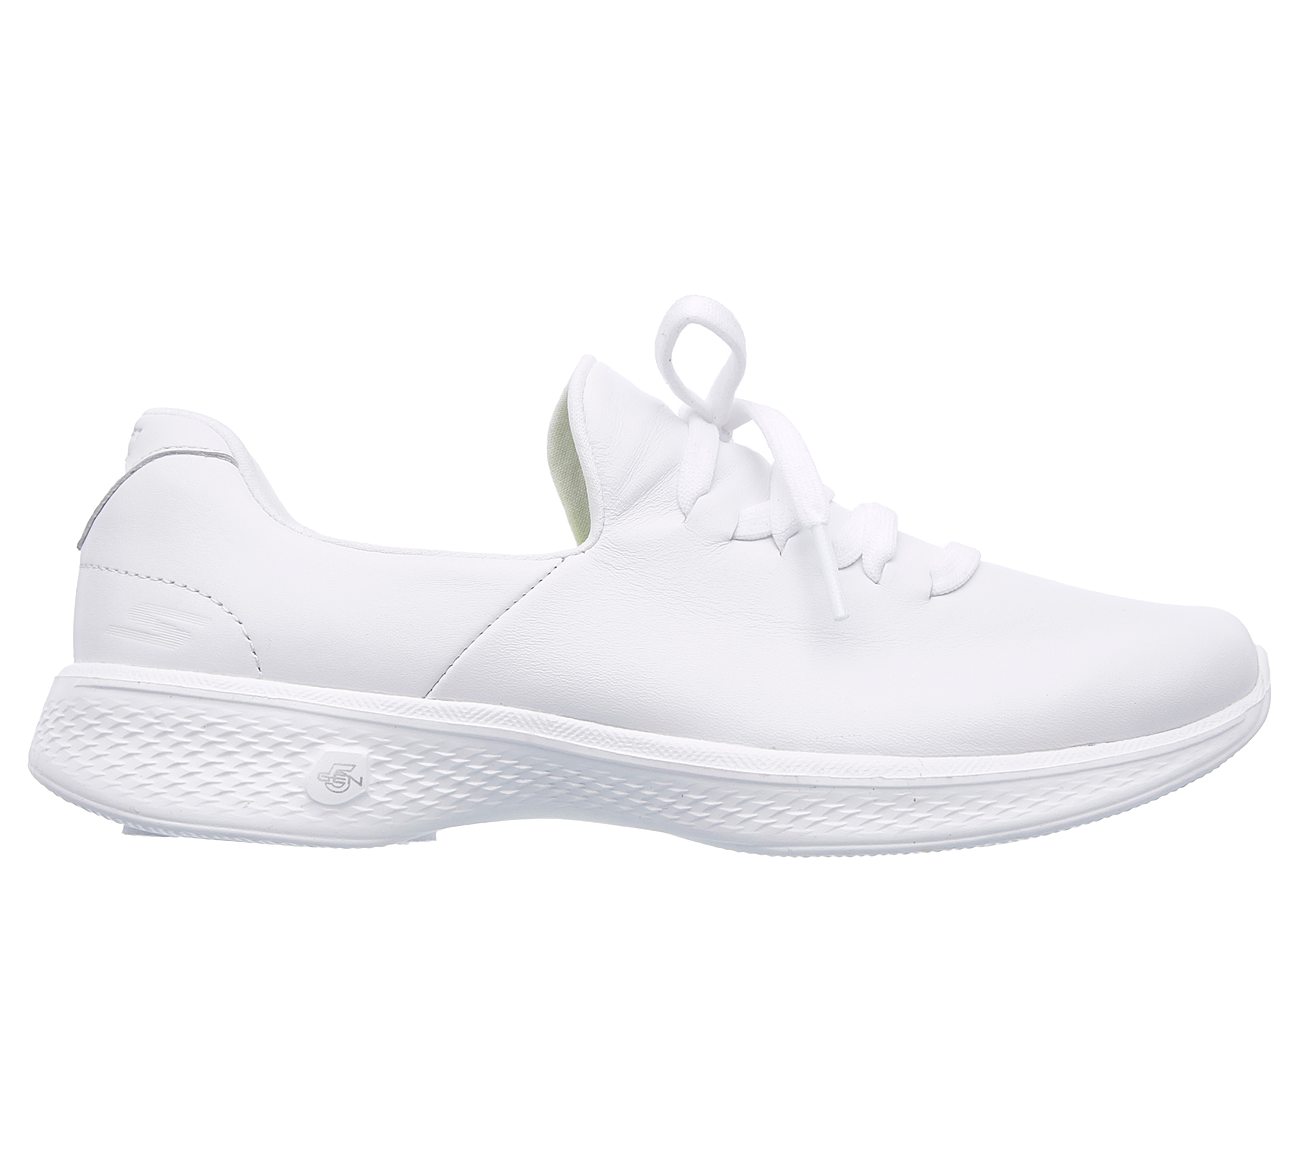 all white skechers shoes off 77 